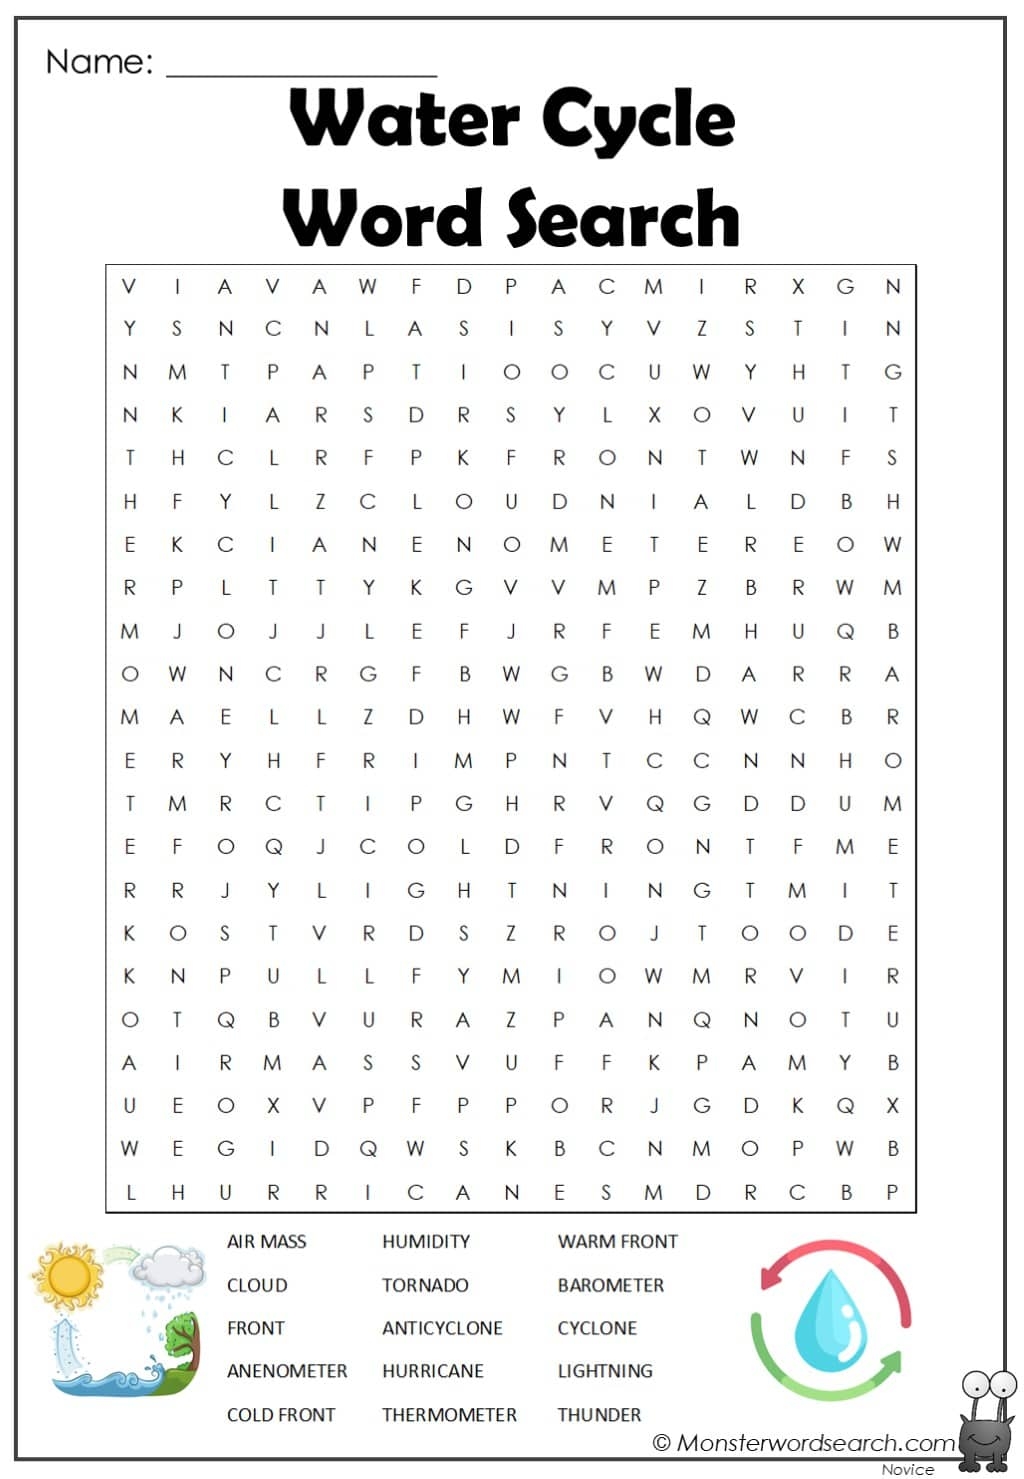 Water Cycle Word Search Monster Word Search